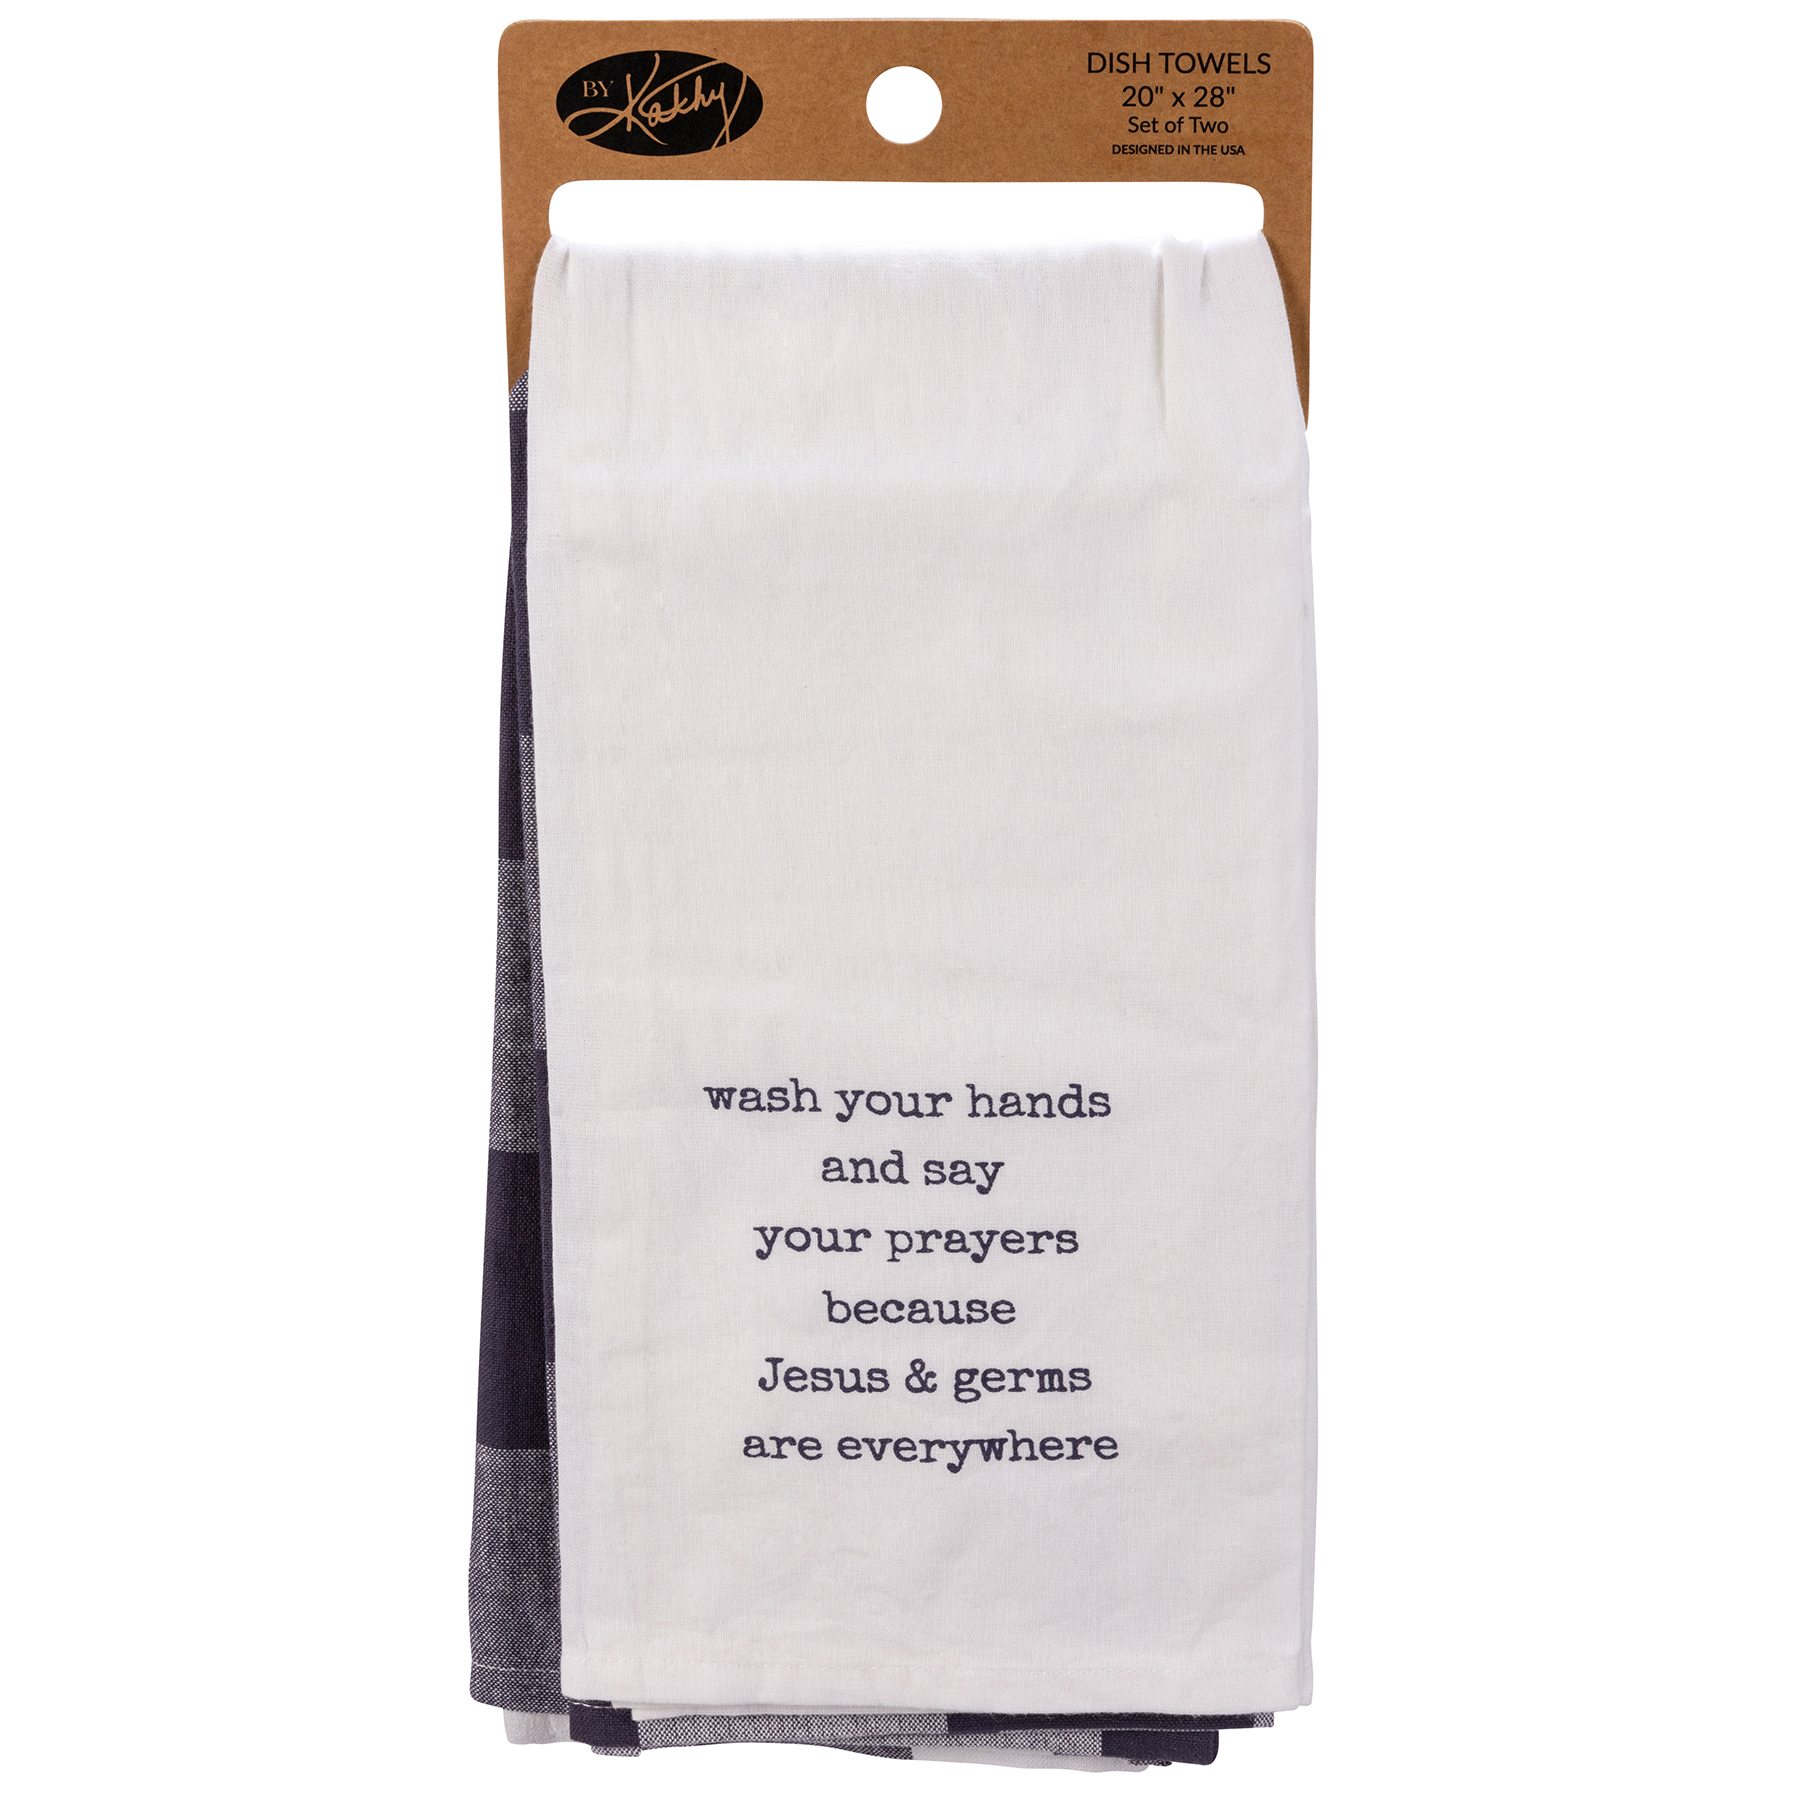 Primitives by Kathy Kitchen Towel Set - Winter Blessings